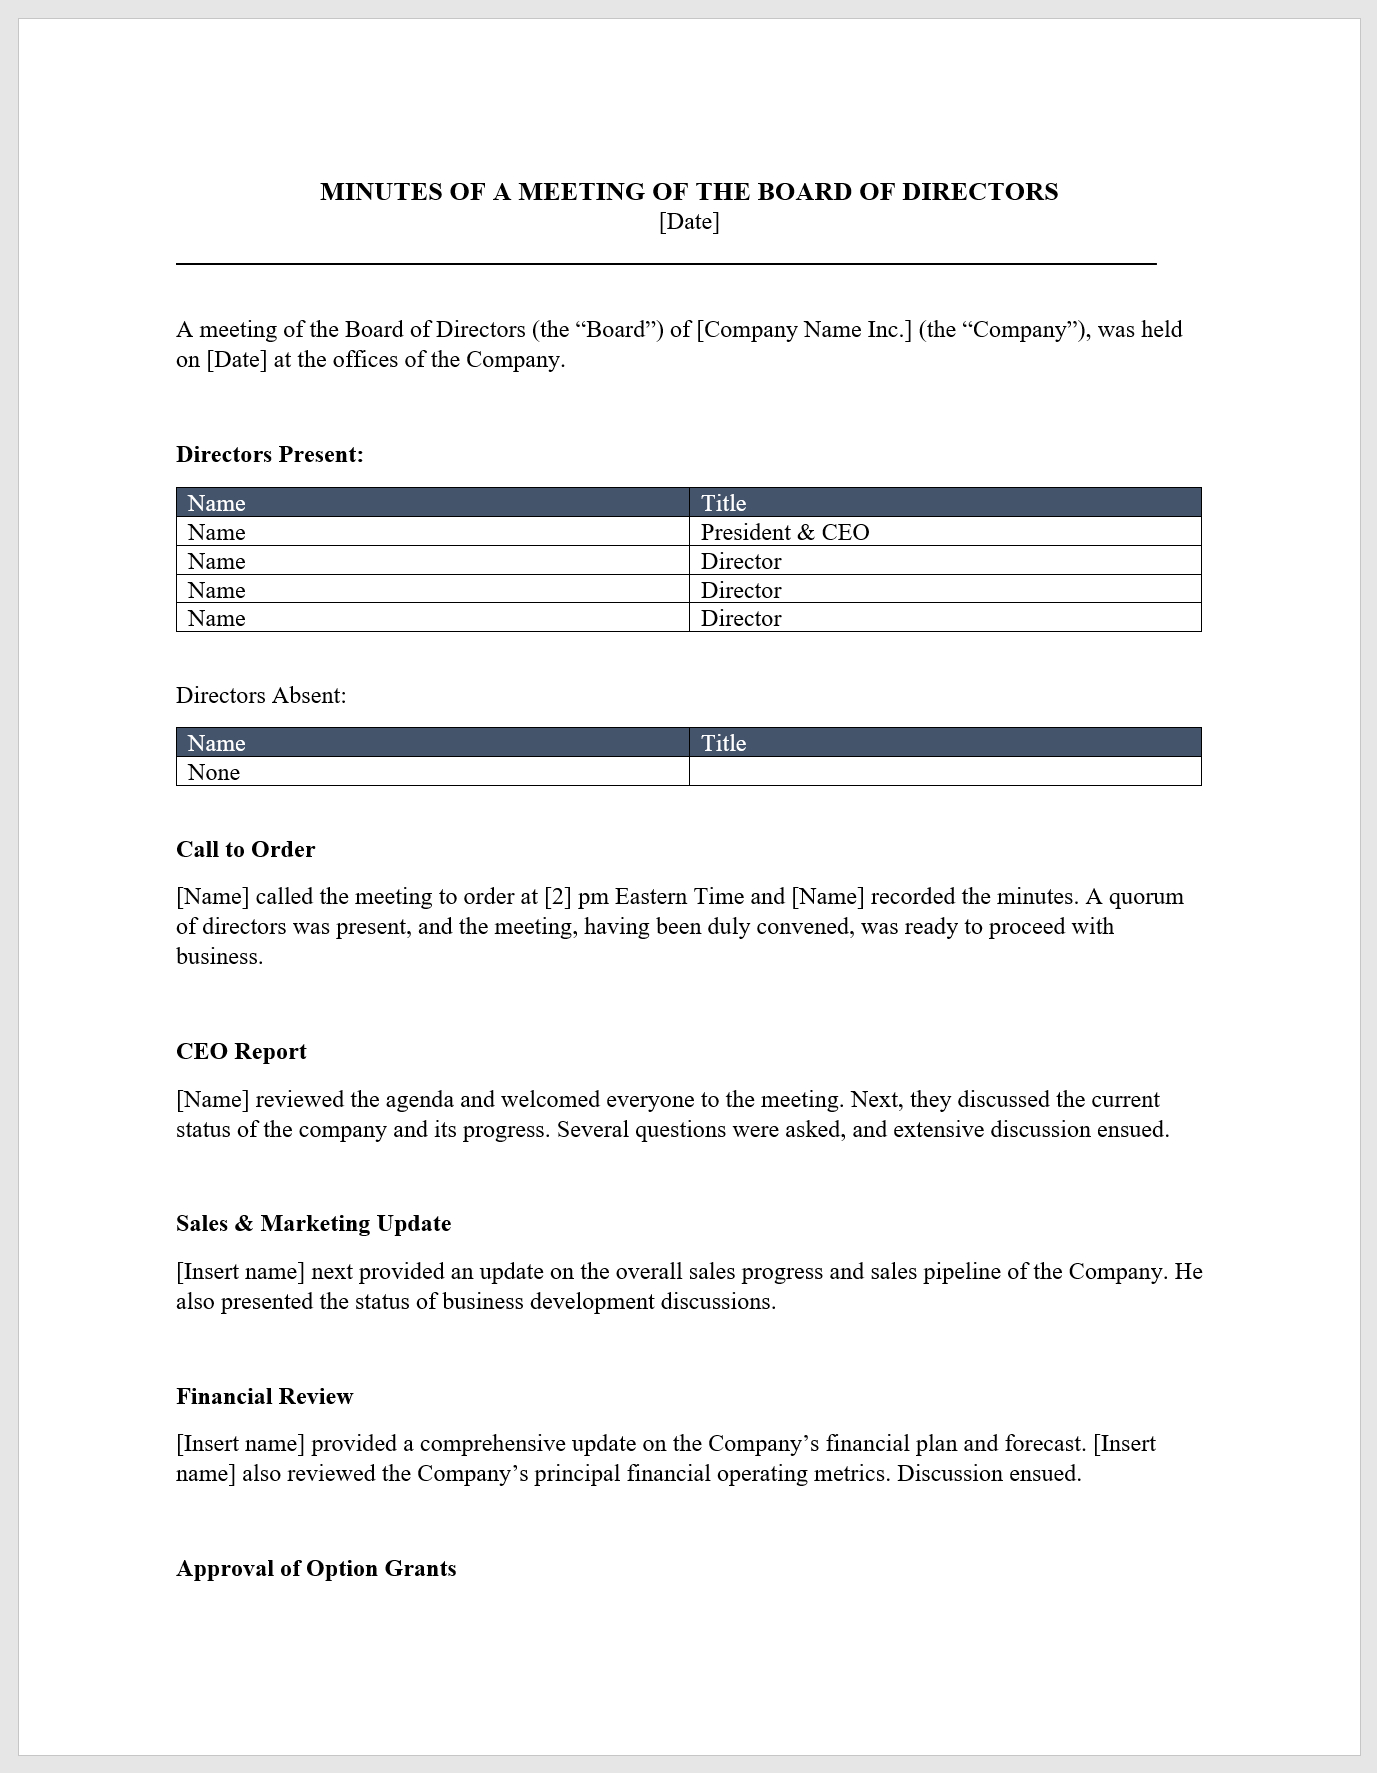 Board Meeting Minutes Template Download From Cfi Marketplace in sizing 1377 X 1773